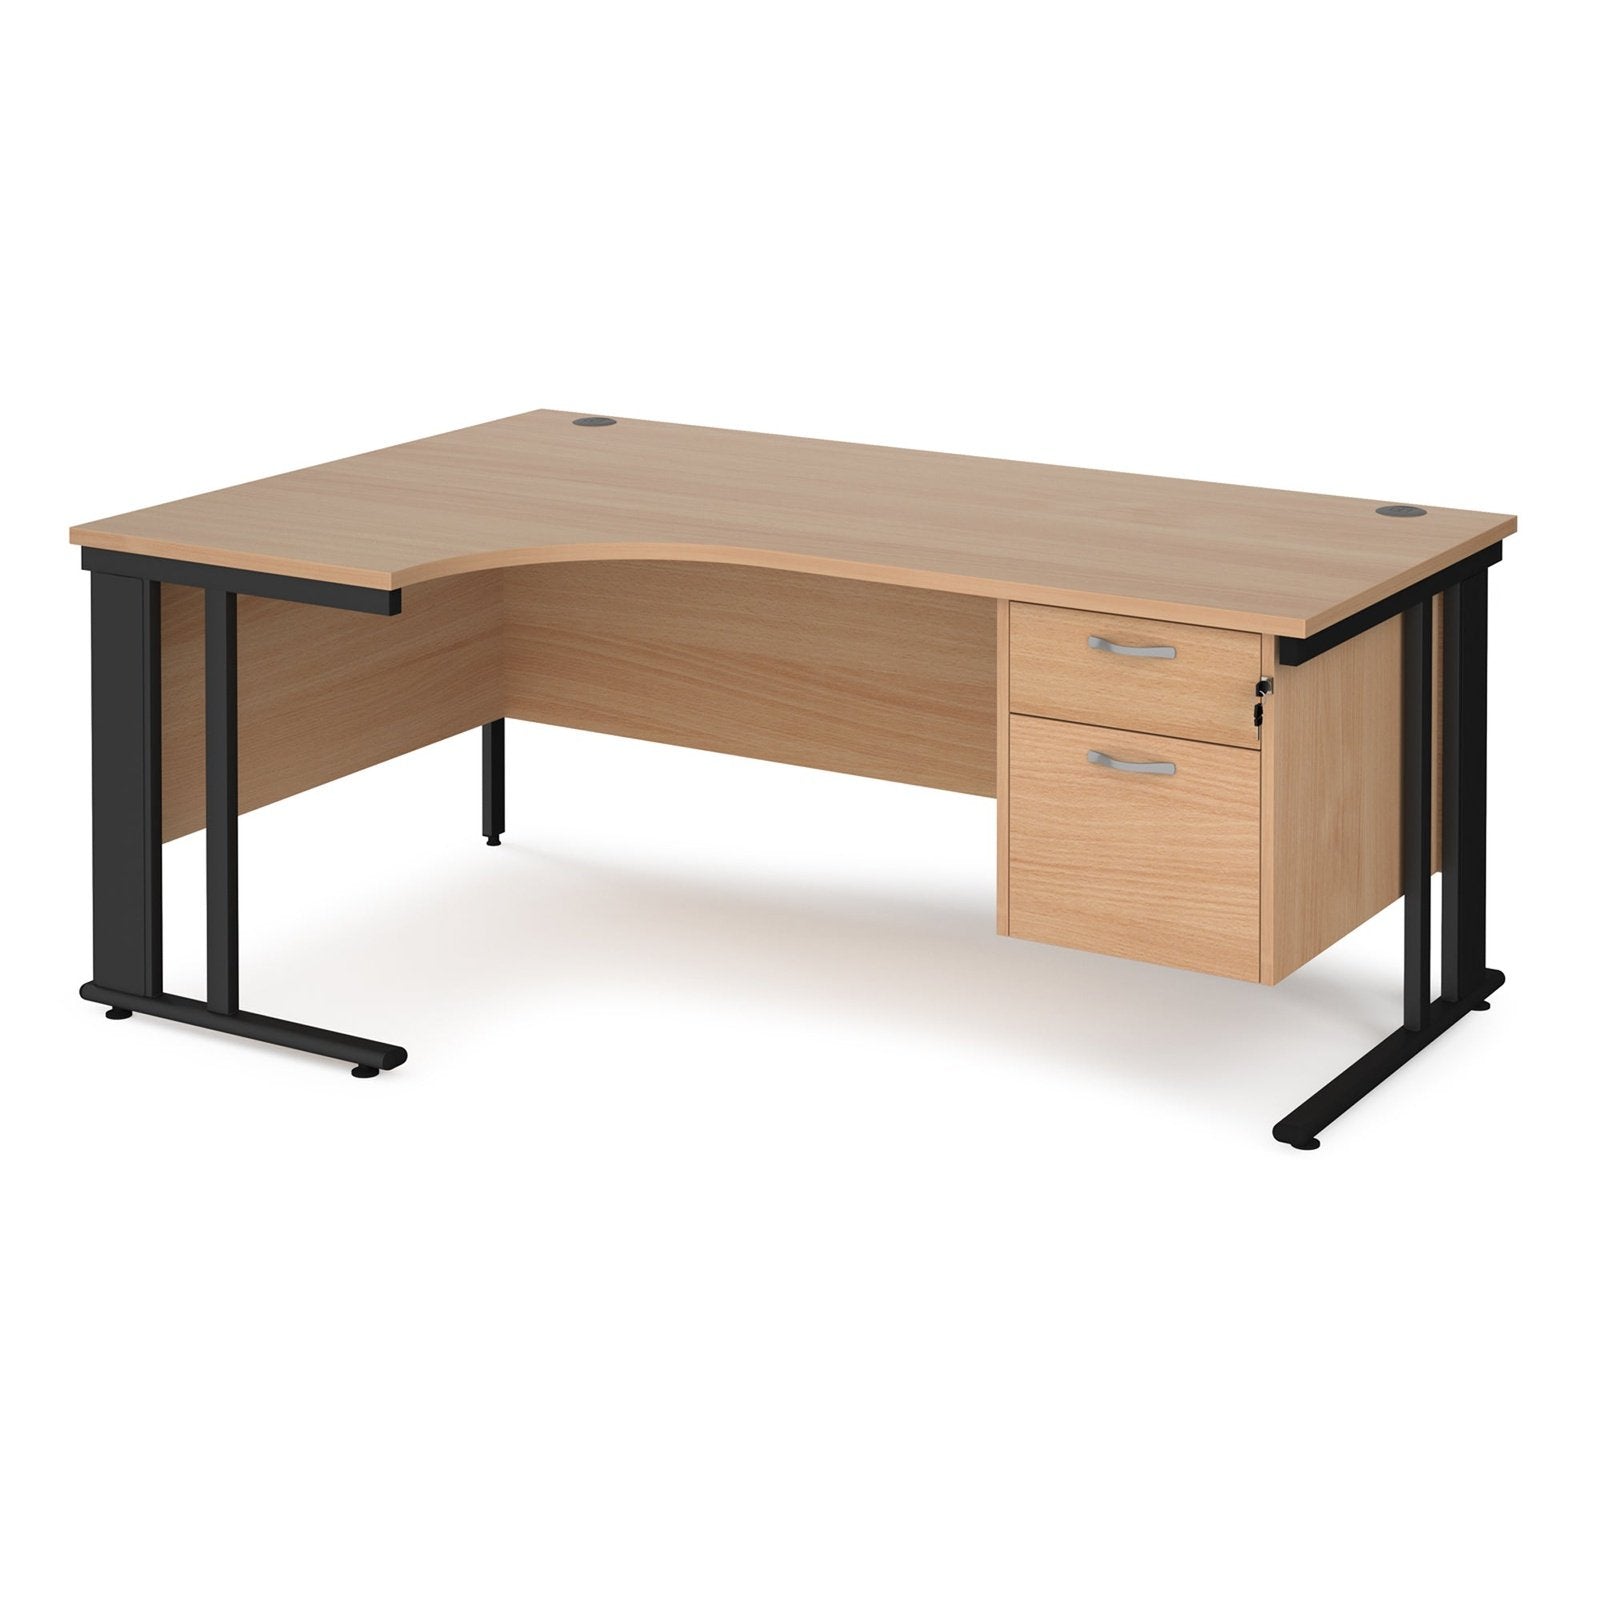 Maestro 25 cable managed leg left hand ergonomic desk with 2 drawer pedestal - Office Products Online